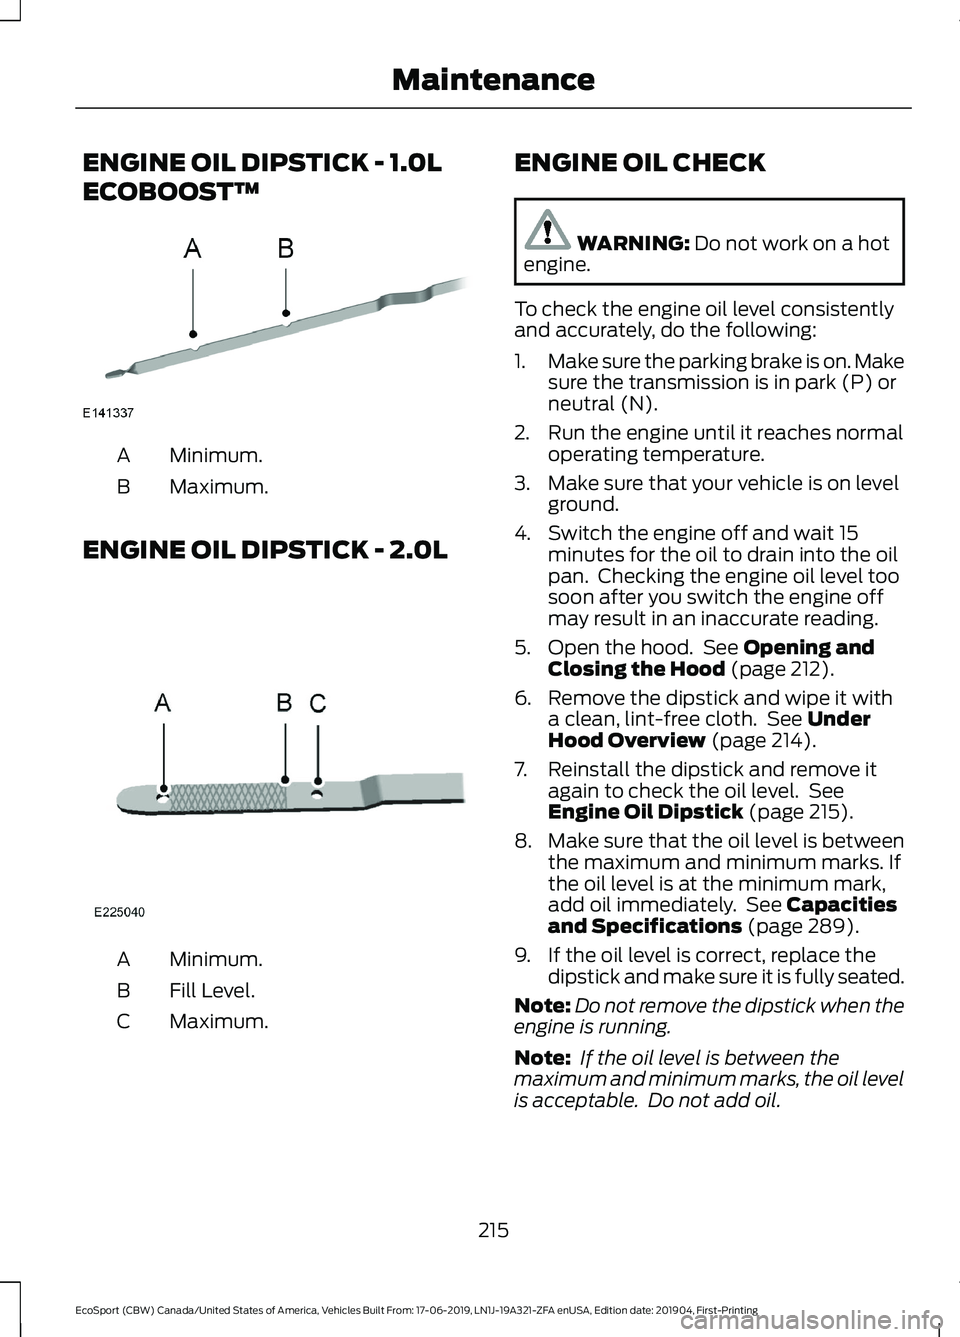 FORD ECOSPORT 2020  Owners Manual ENGINE OIL DIPSTICK - 1.0L
ECOBOOST™
Minimum.A
Maximum.B
ENGINE OIL DIPSTICK - 2.0L
Minimum.A
Fill Level.B
Maximum.C
ENGINE OIL CHECK
WARNING: Do not work on a hotengine.
To check the engine oil lev